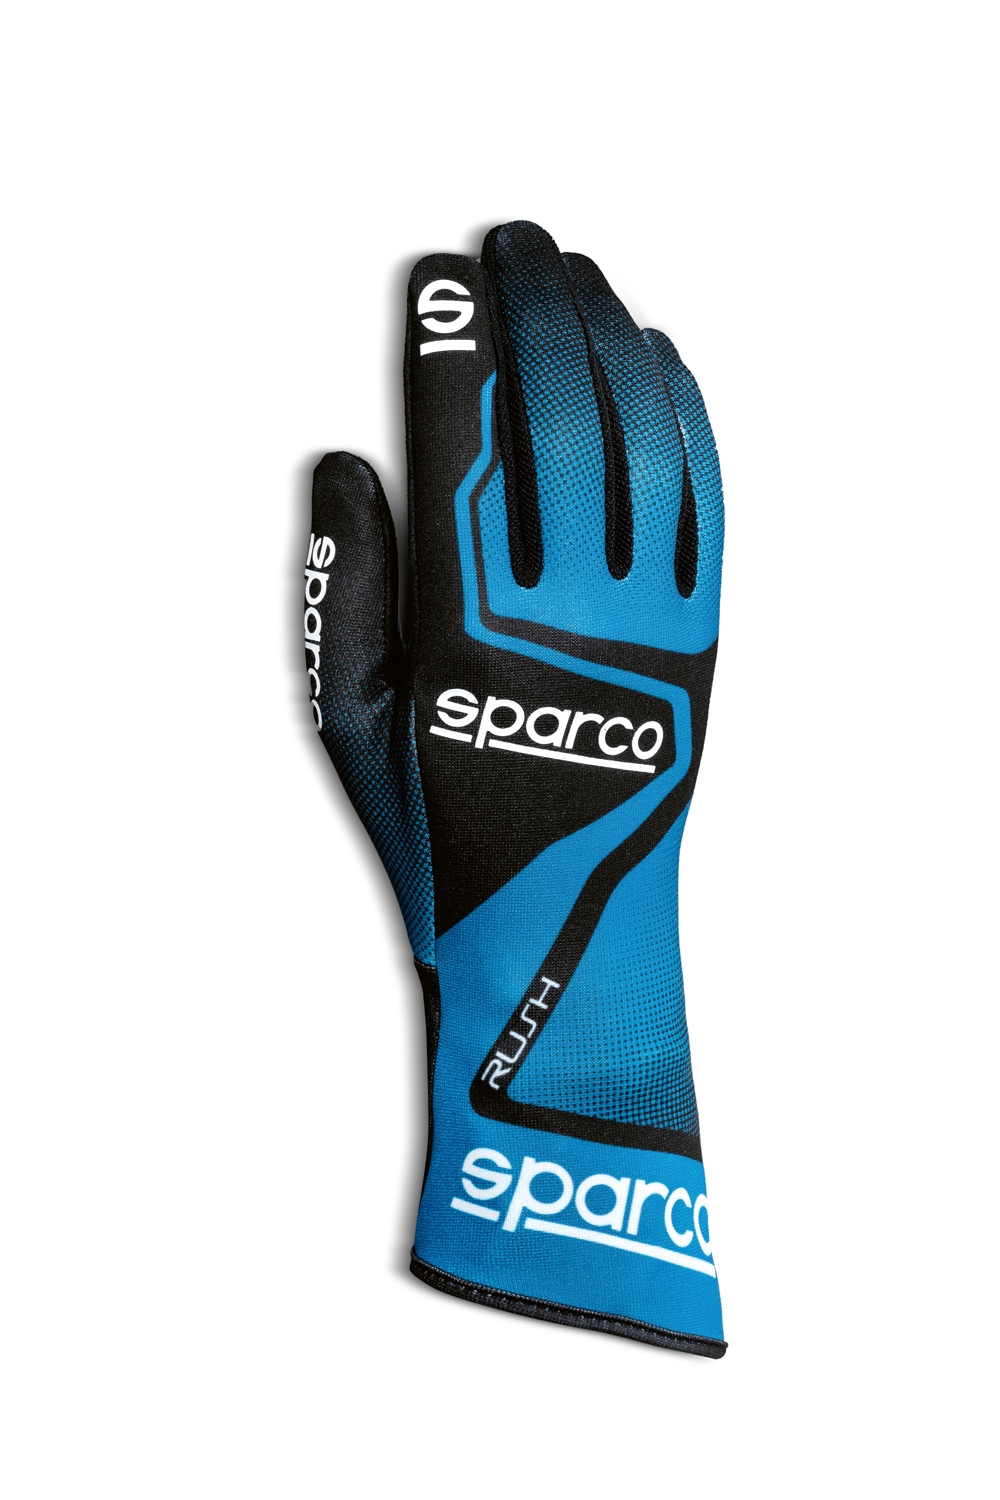 Sparco Karthandschuhe Point Rush | Racing